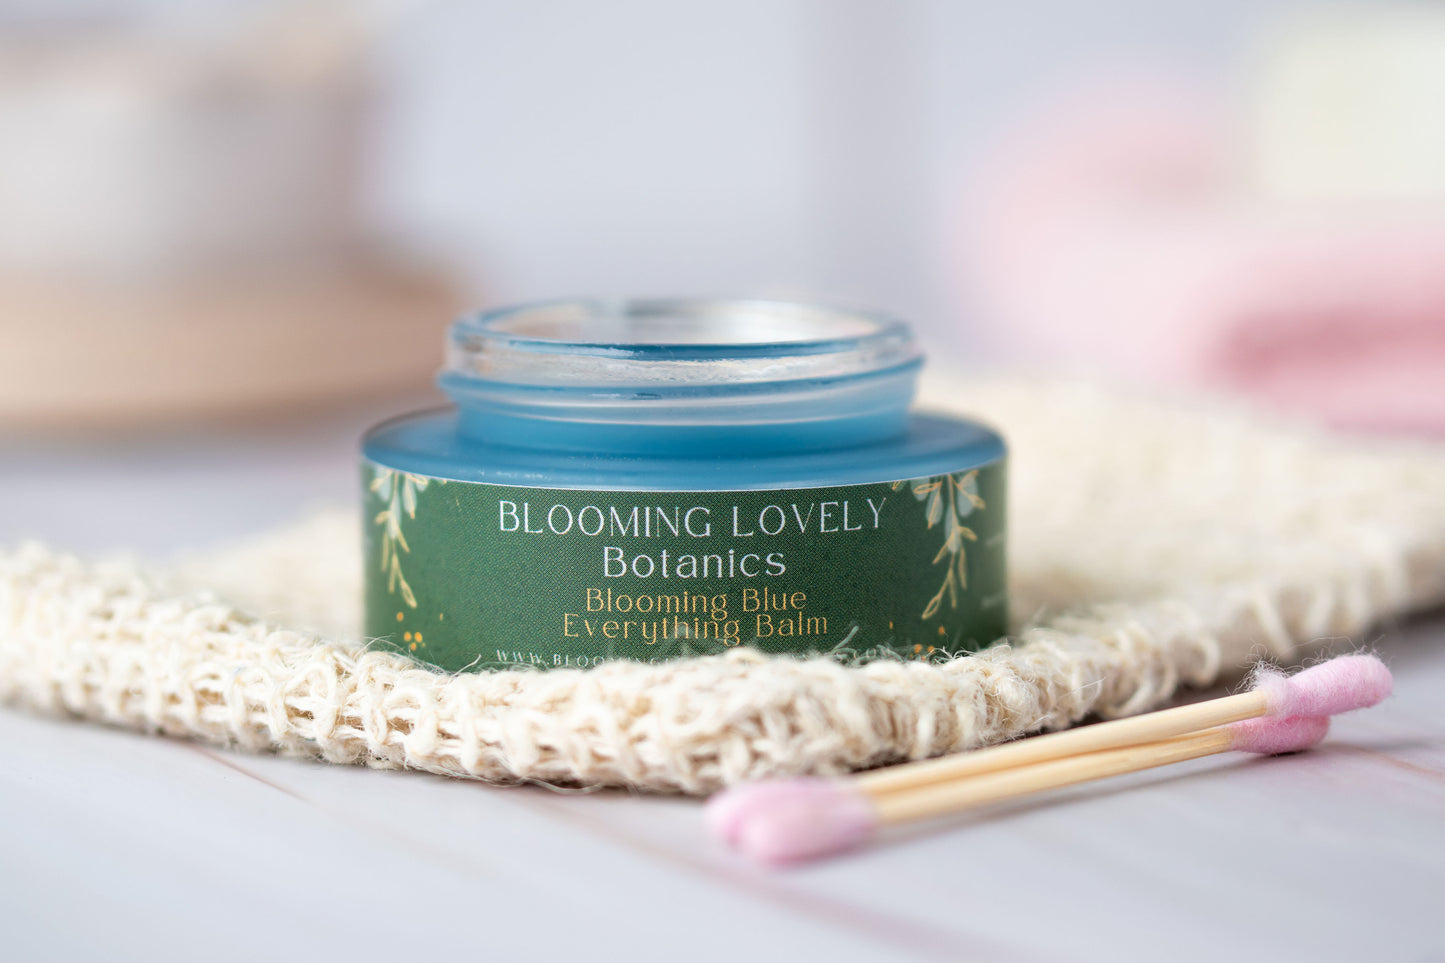 Blooming Blue Everything Balm